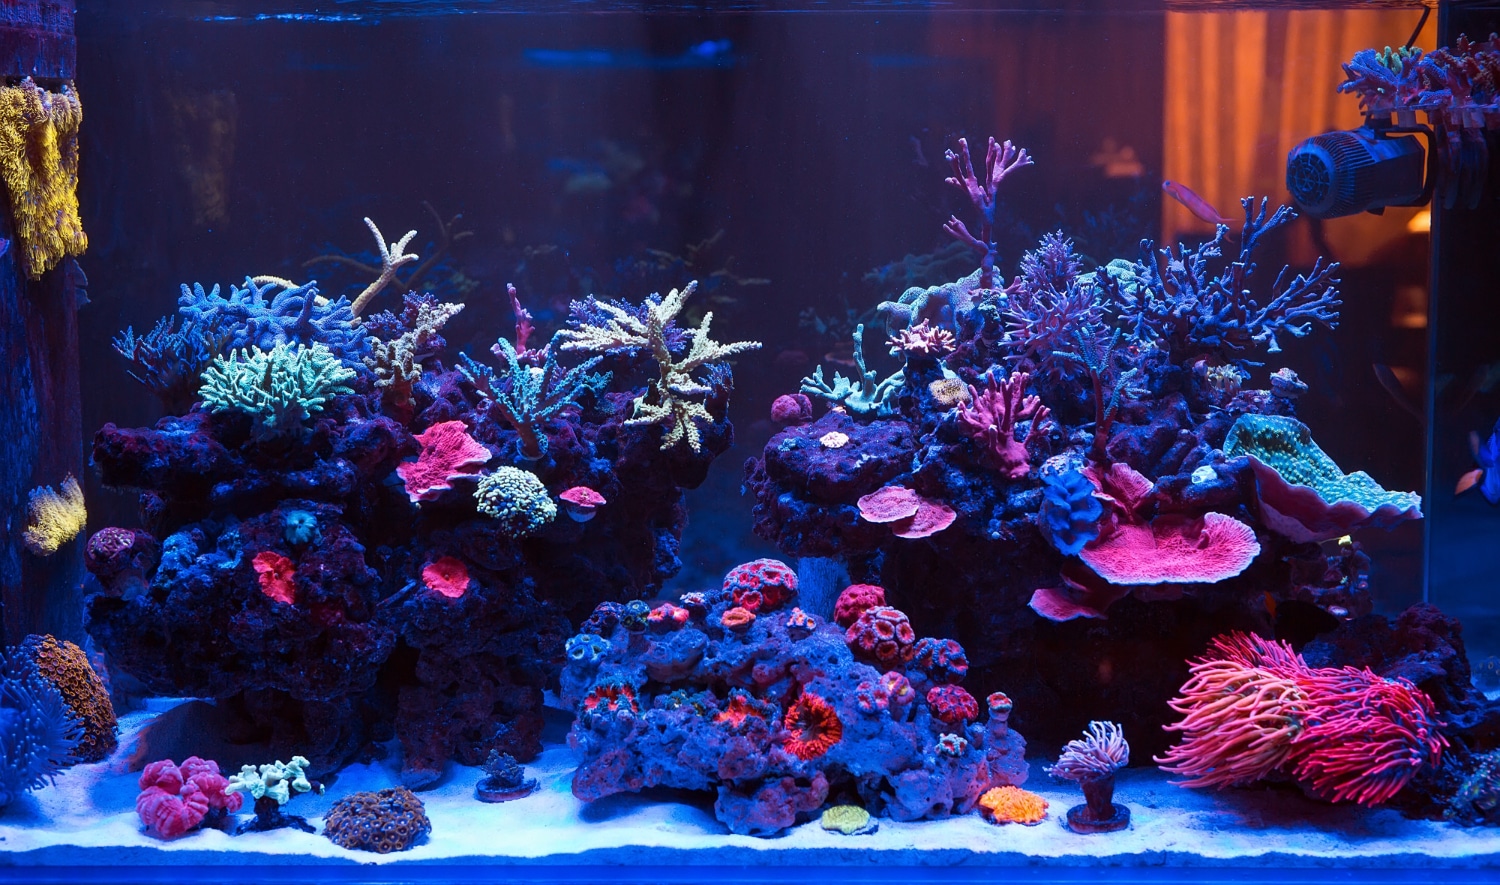 How to Prepare Your Reef Tank Before Leaving on Vacation